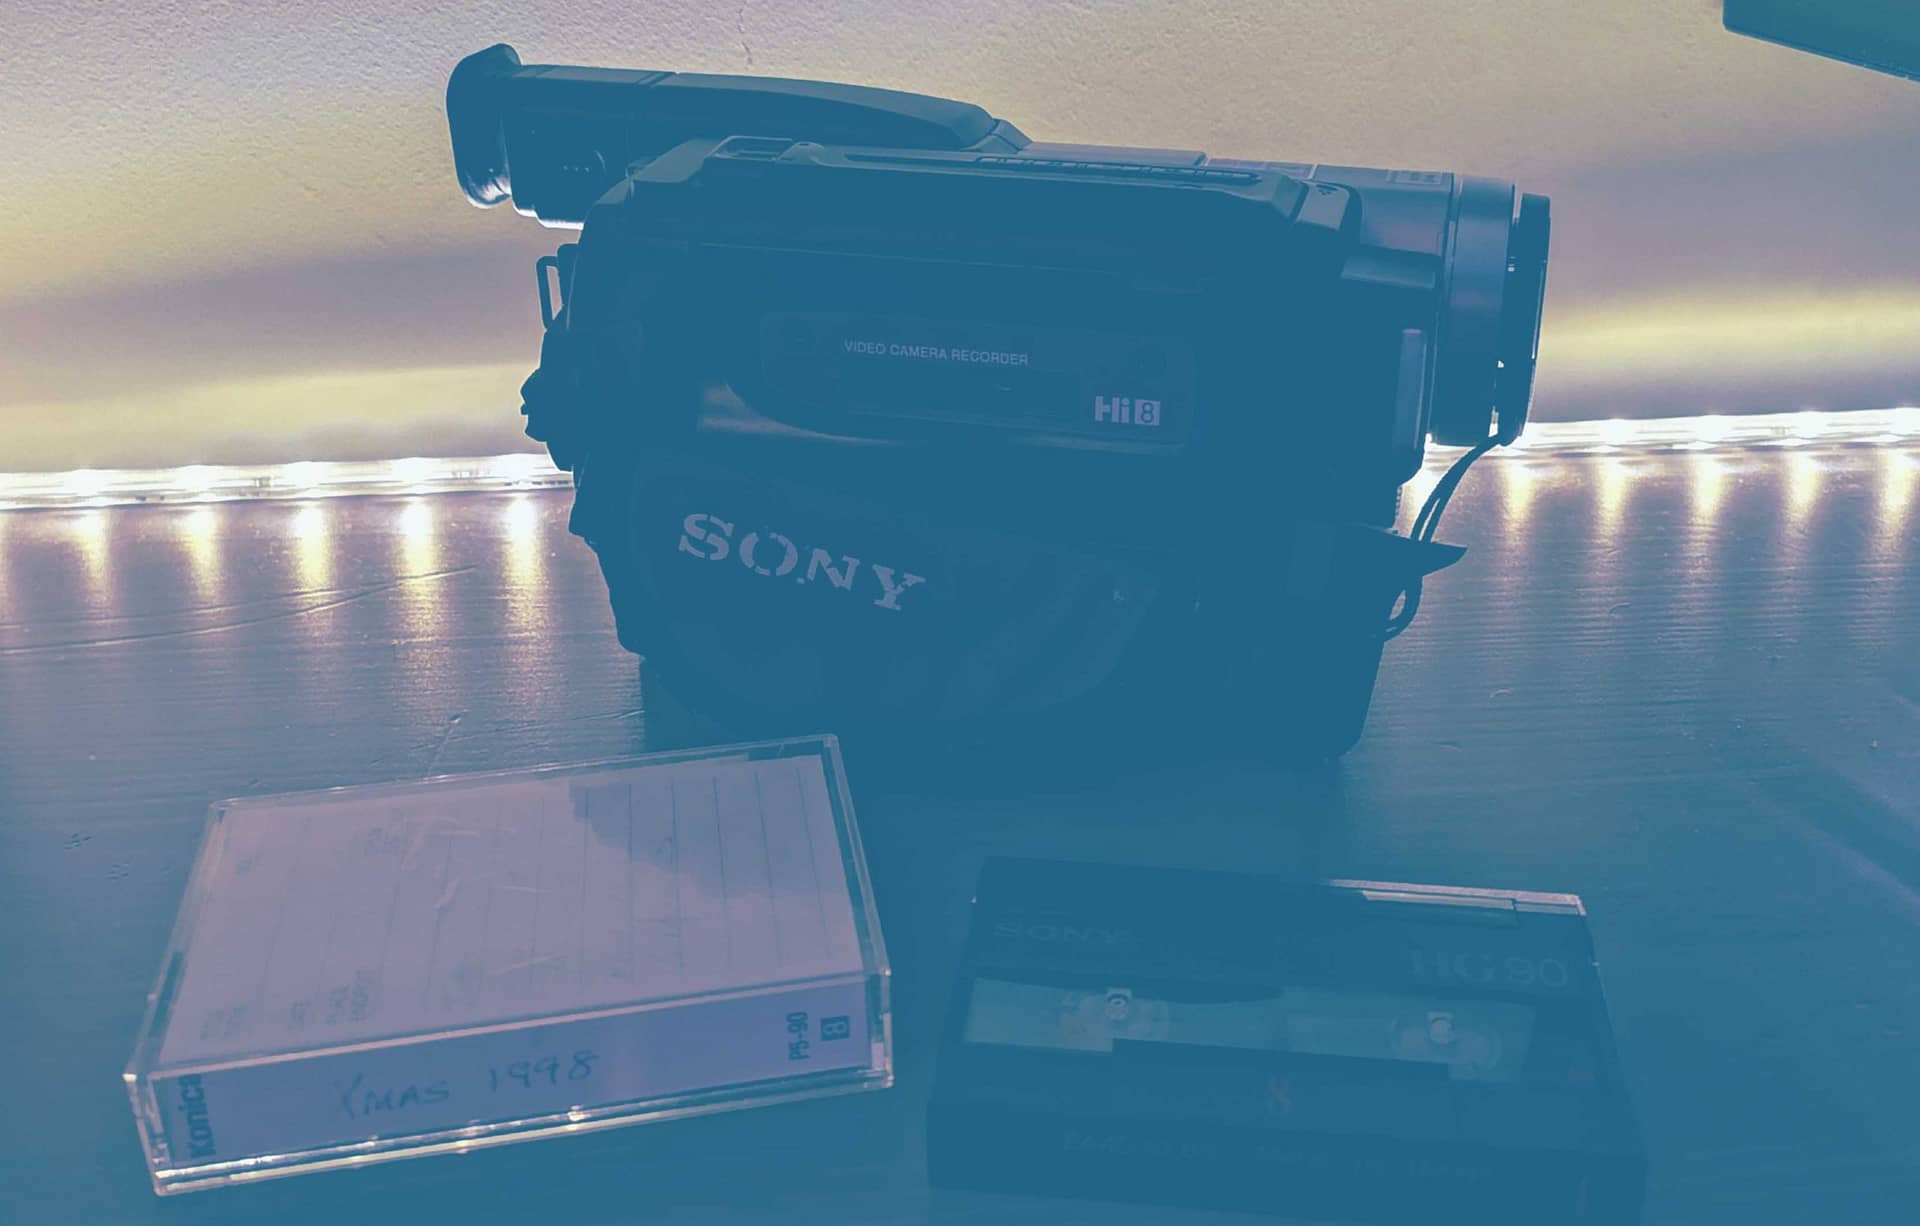 Tips for Converting Your Old Camcorder Tapes to Digital